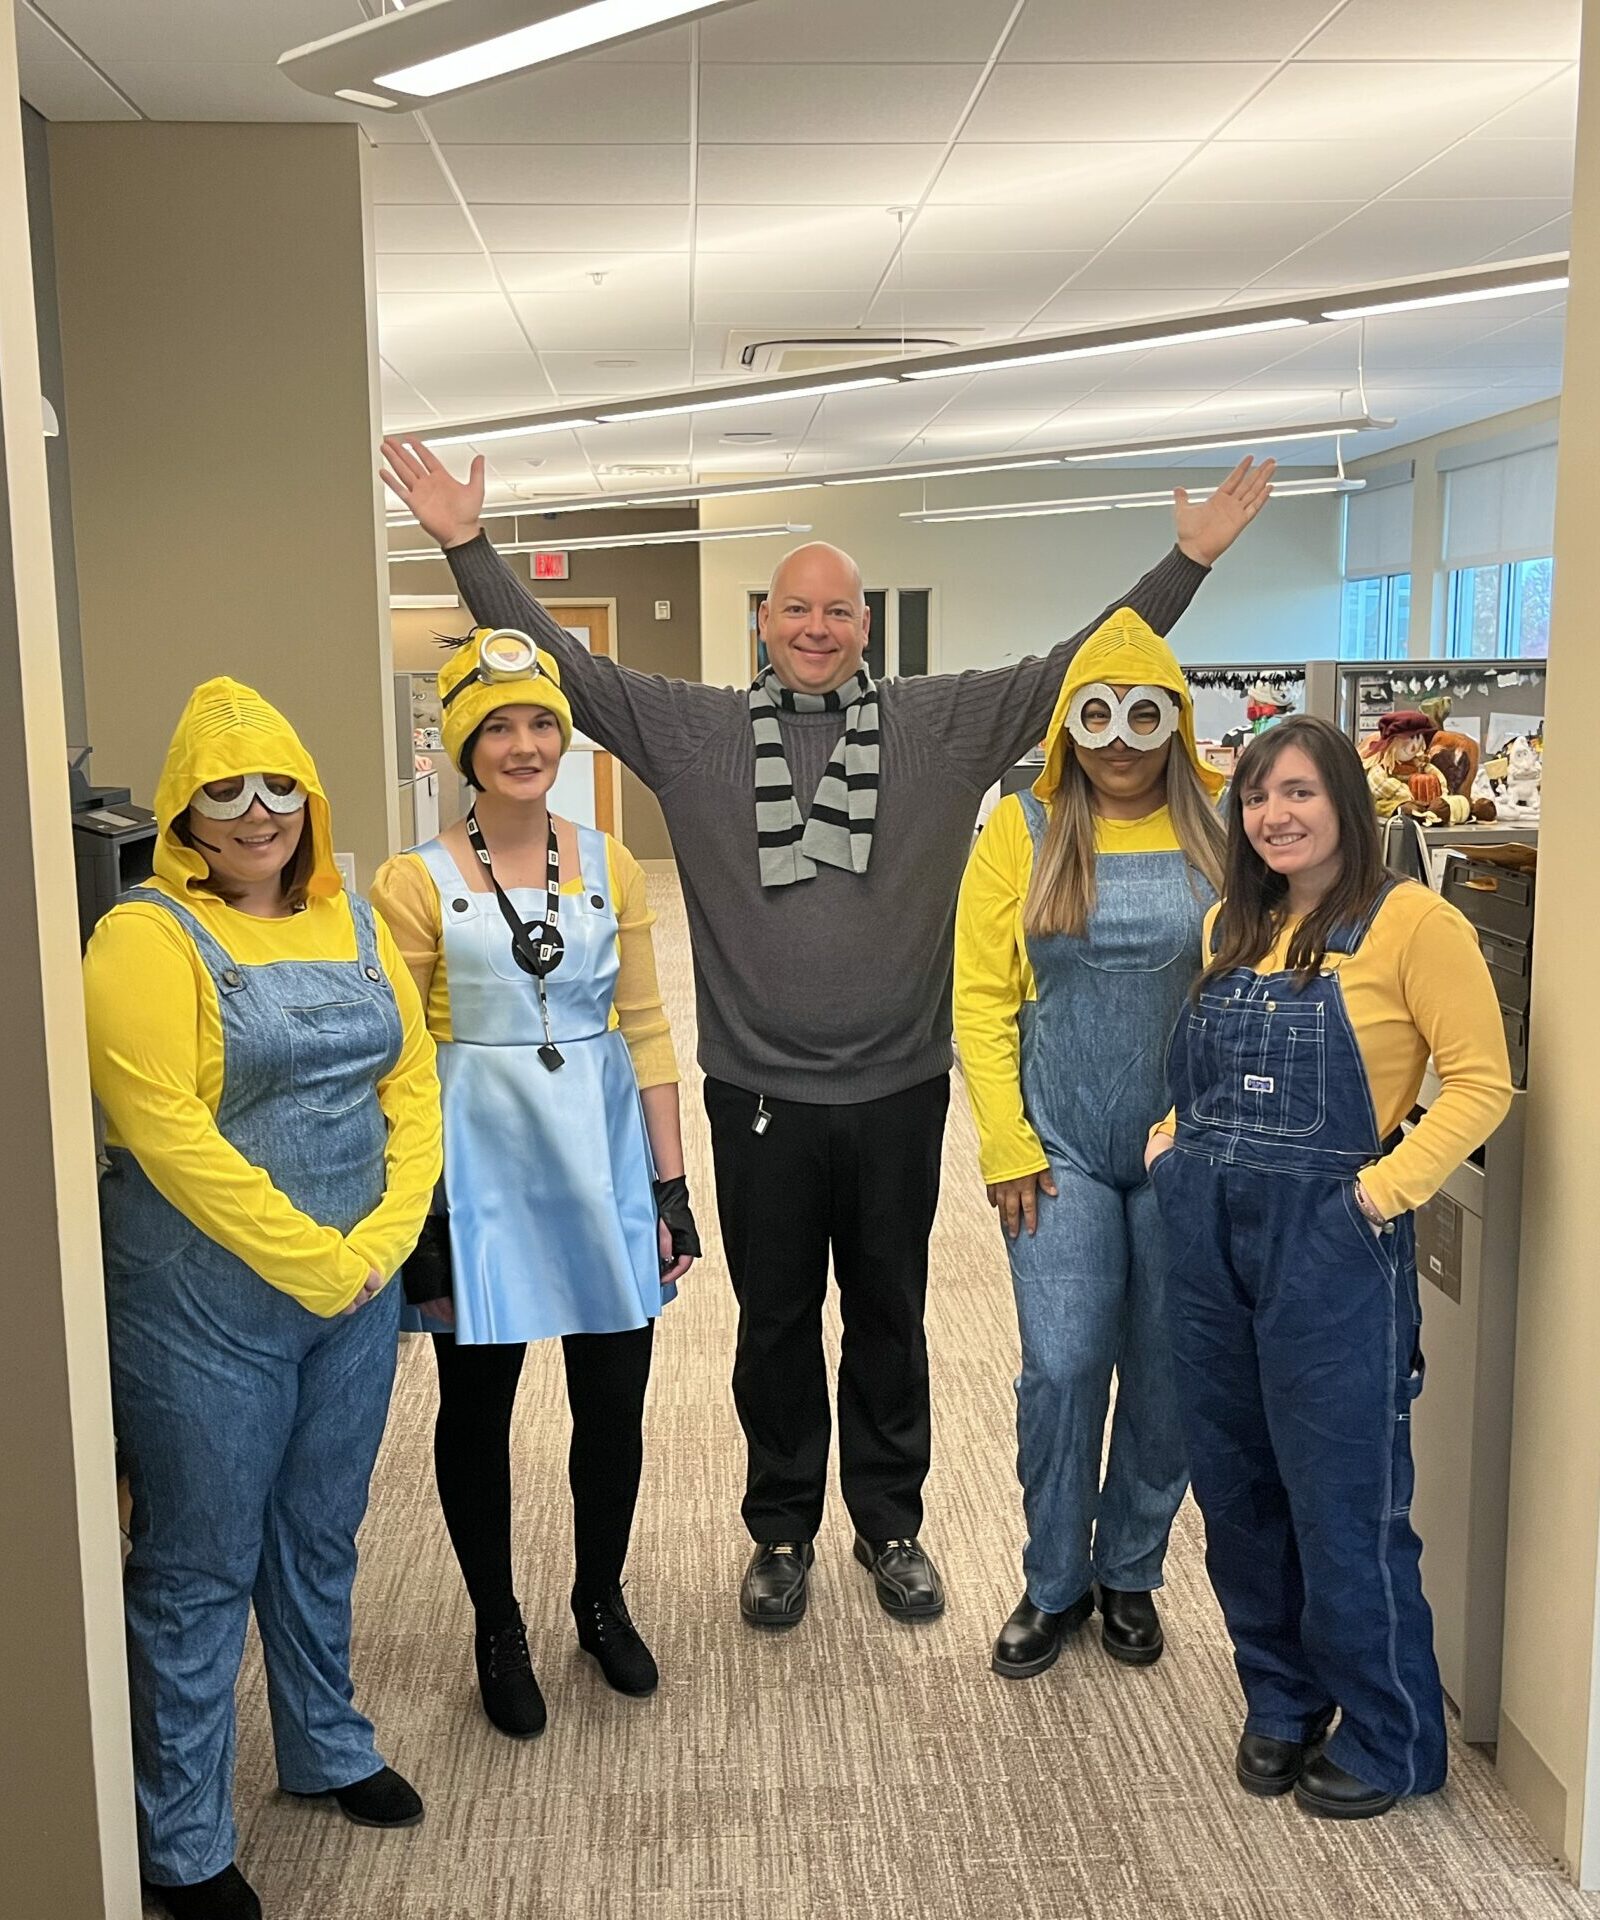 Staff dressed as the Minions